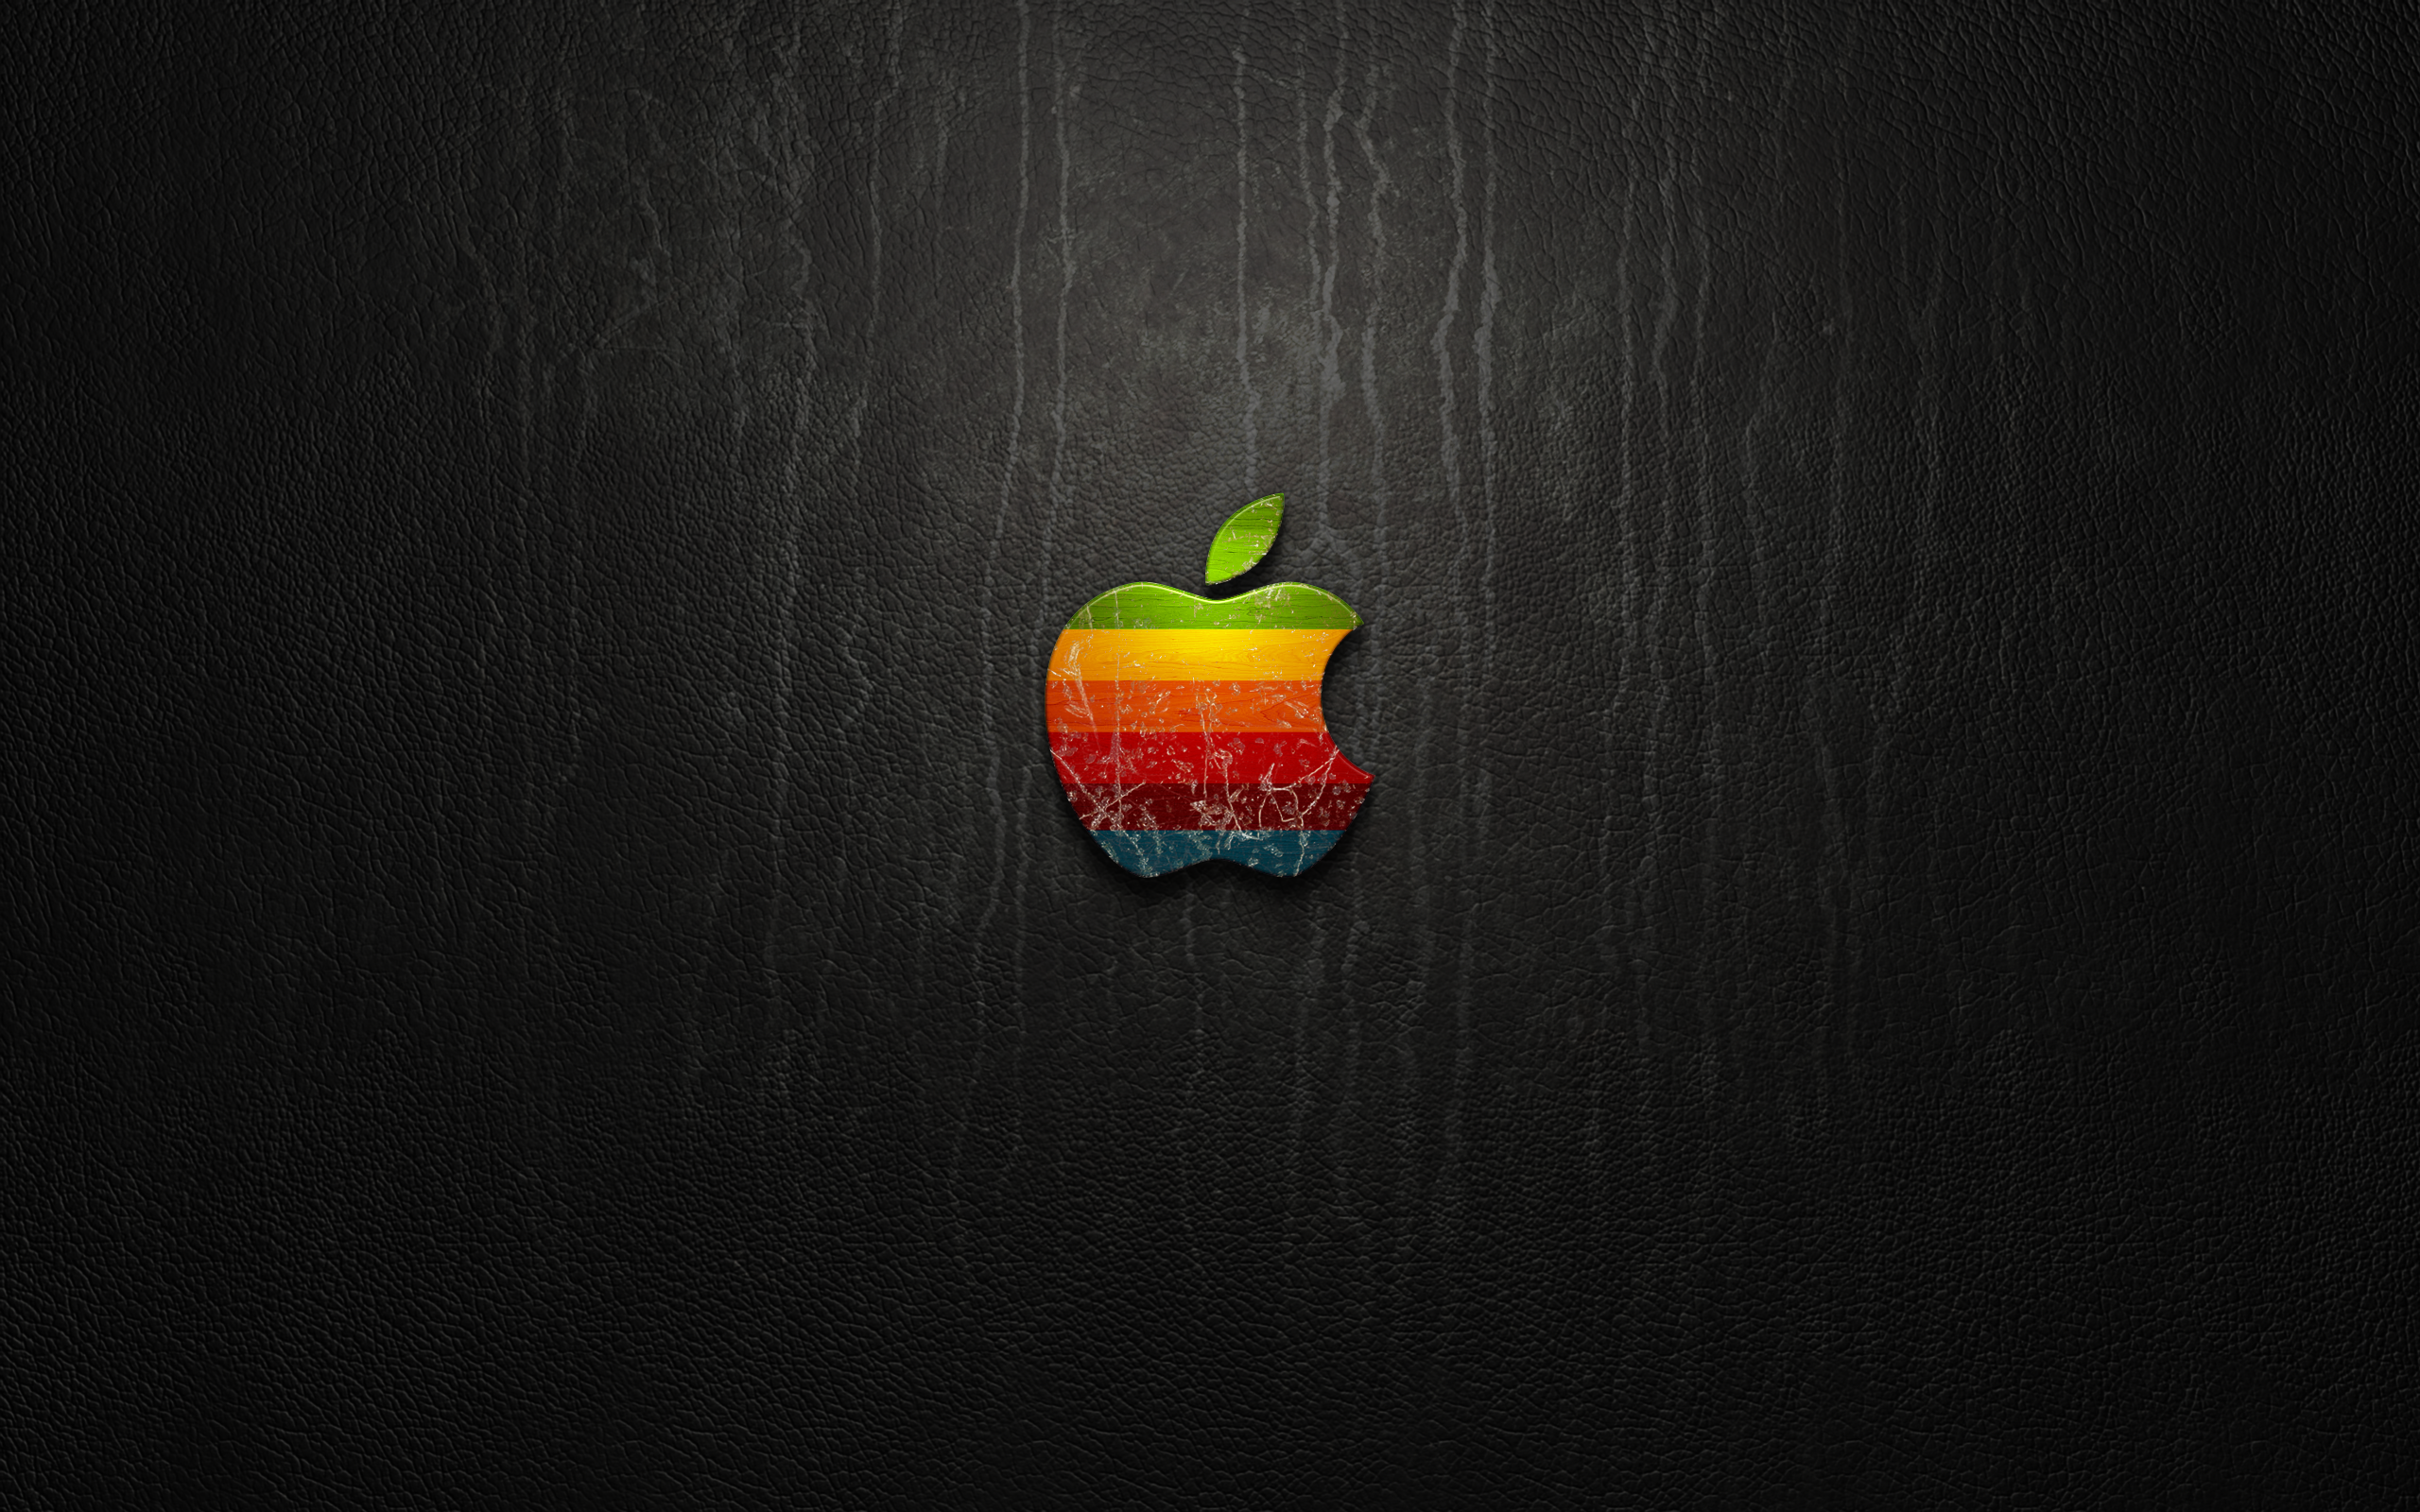 Free Apple Logo HD Wallpapers Backgrounds Images Gallery For Mac